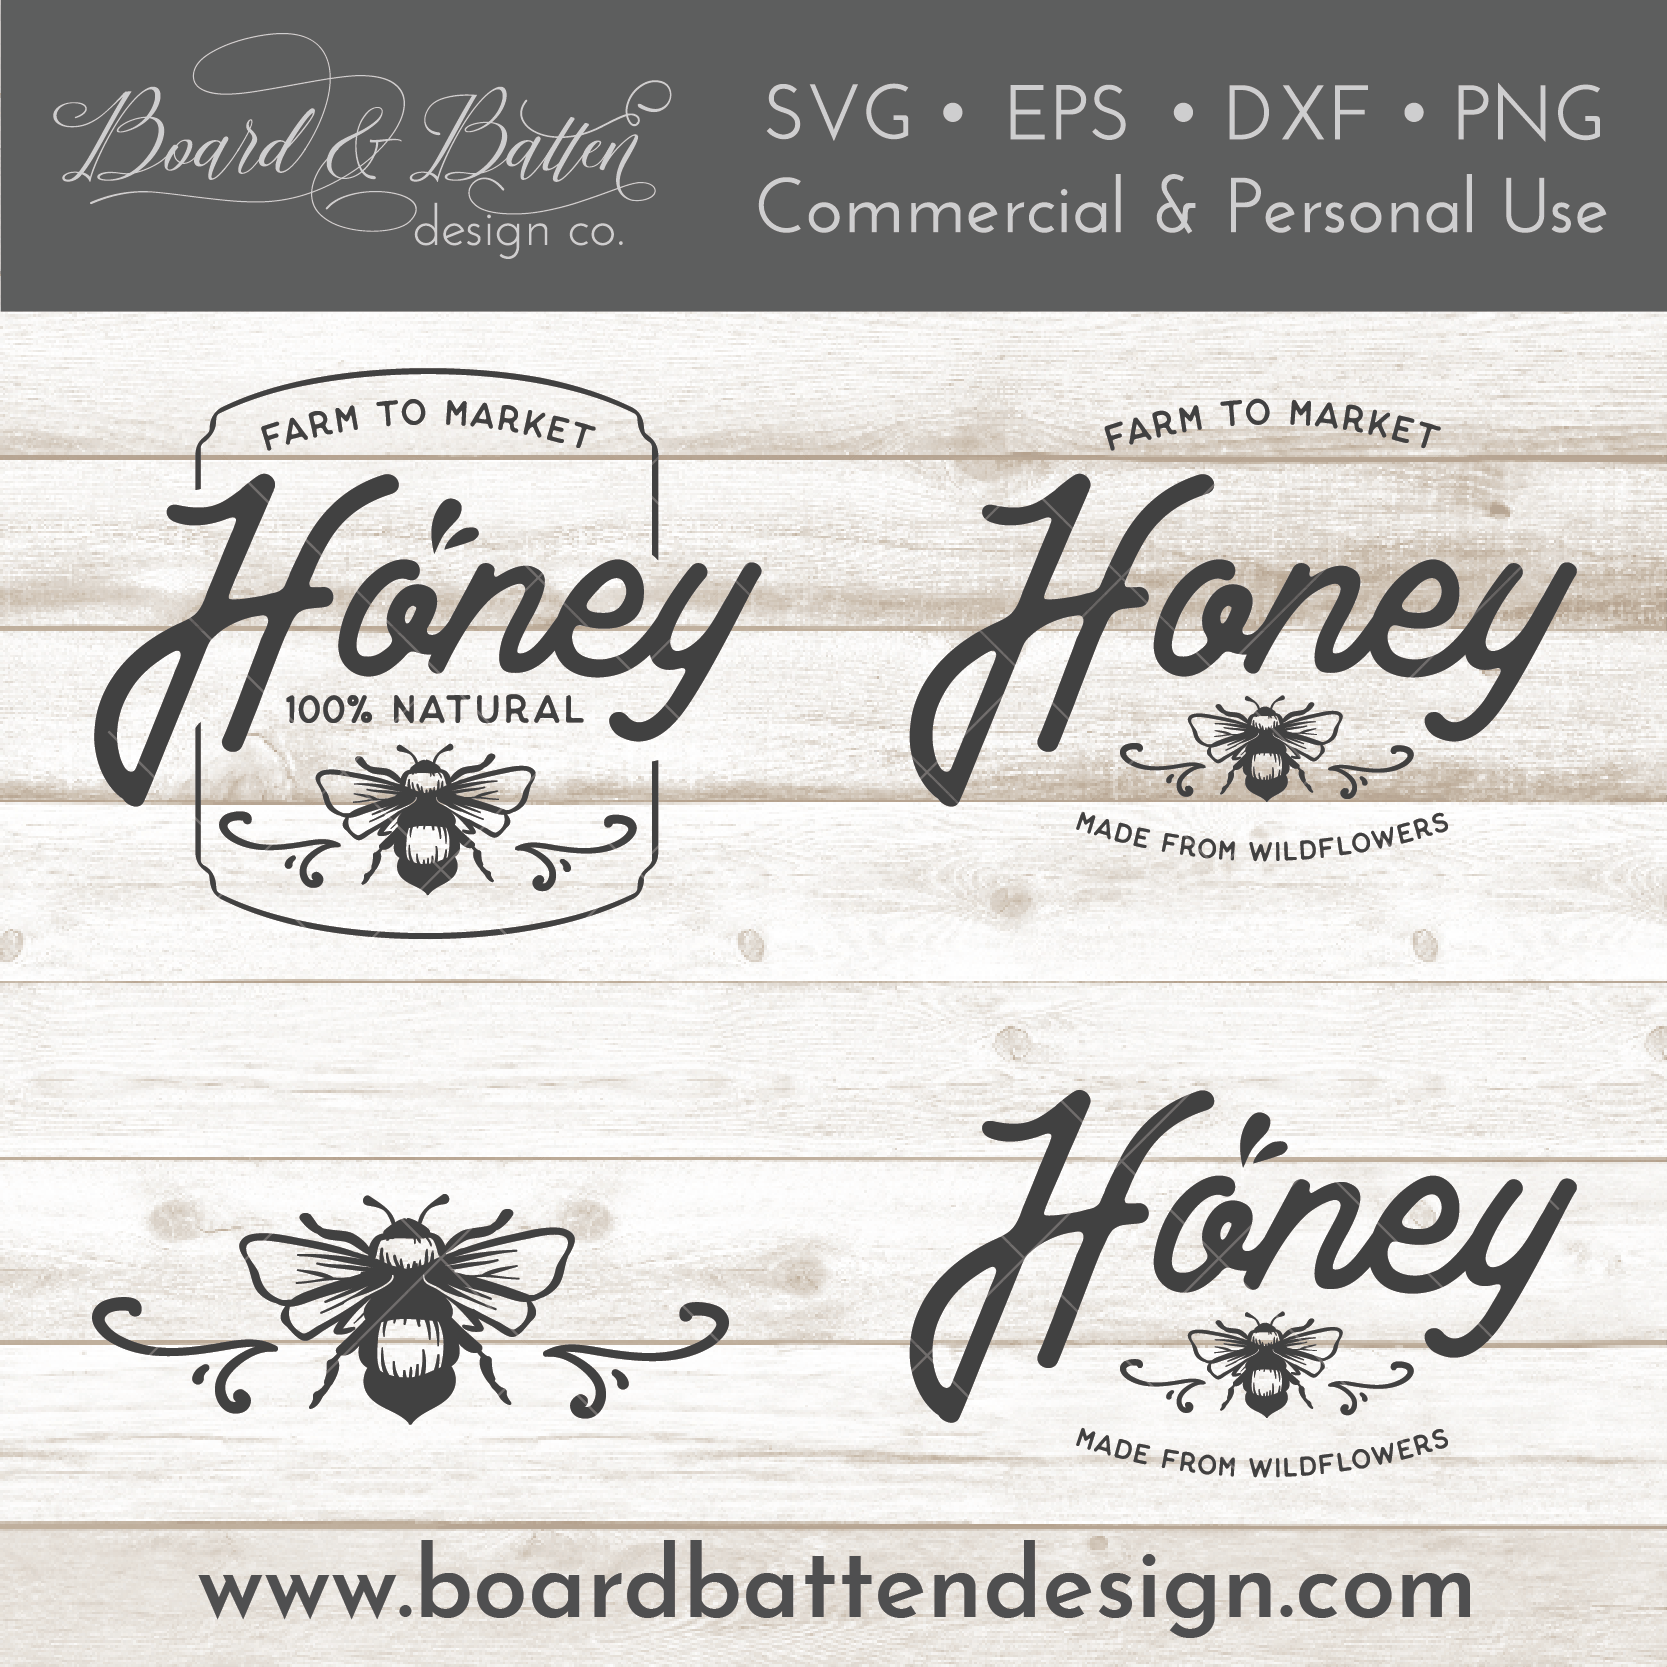 Local Honey Farmhouse SVG File Set for Beekeeper - Commercial Use SVG Files for Cricut & Silhouette